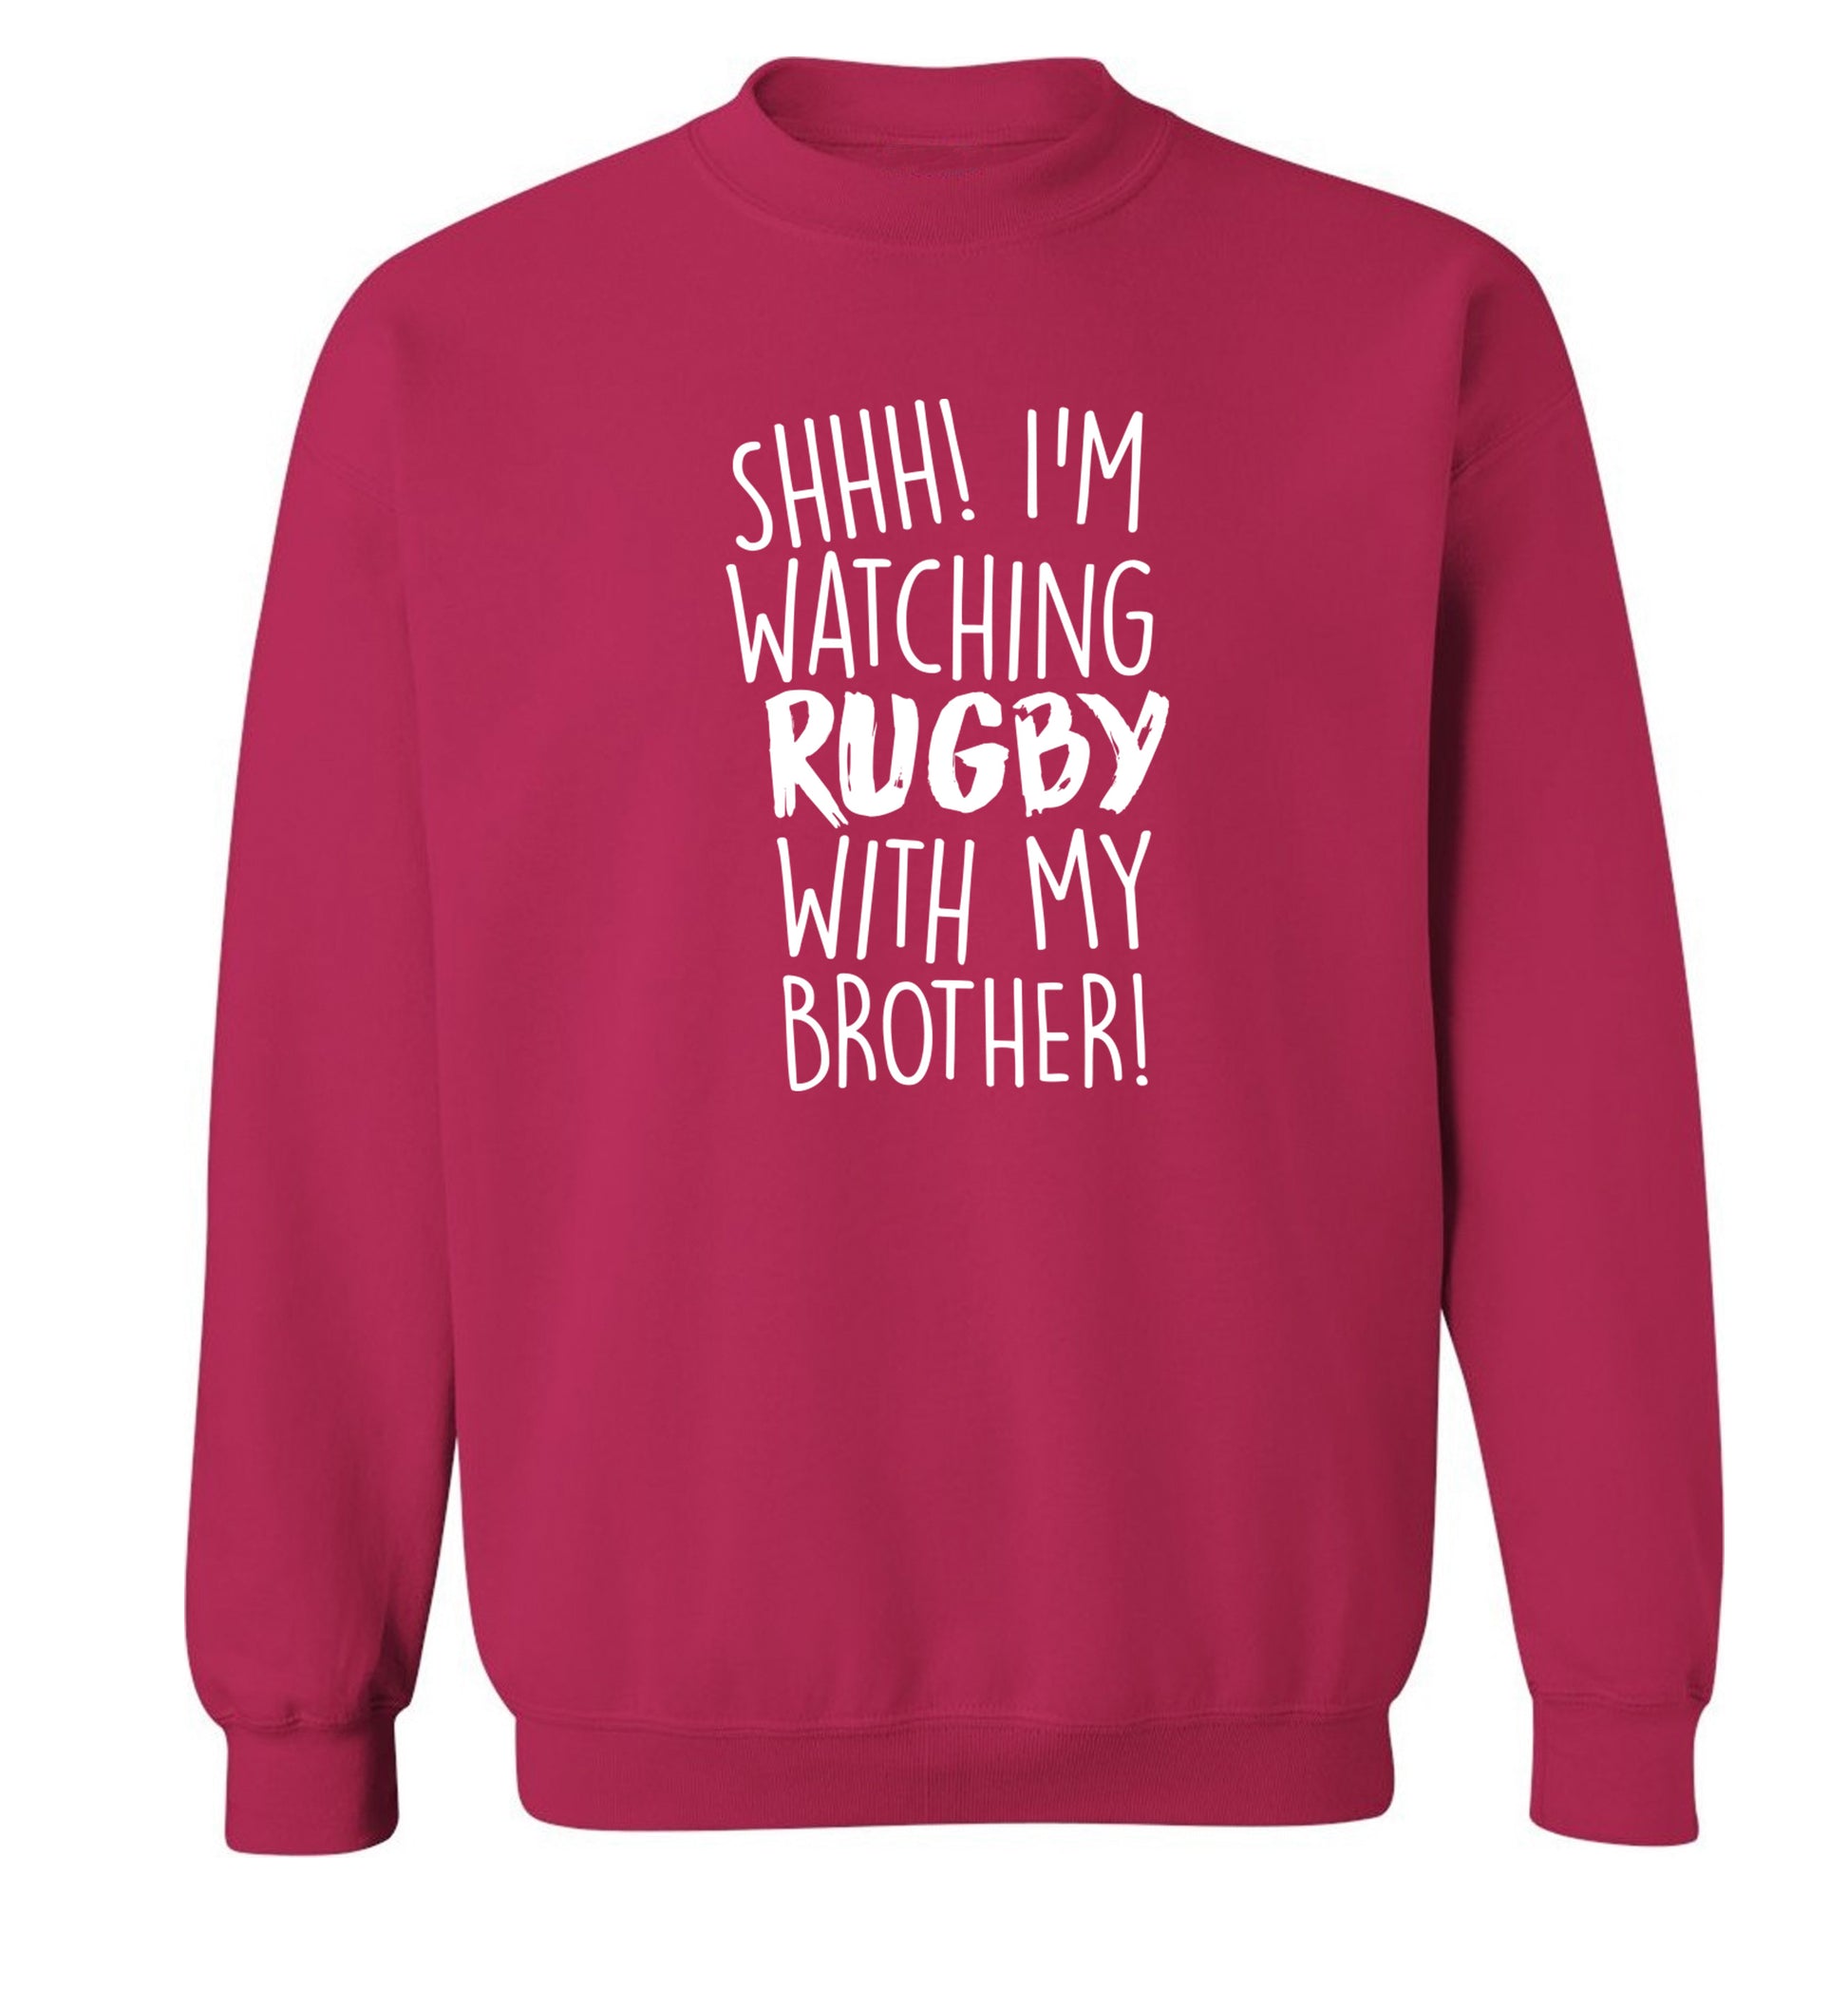 Shh... I'm watching rugby with my brother Adult's unisex pink Sweater 2XL